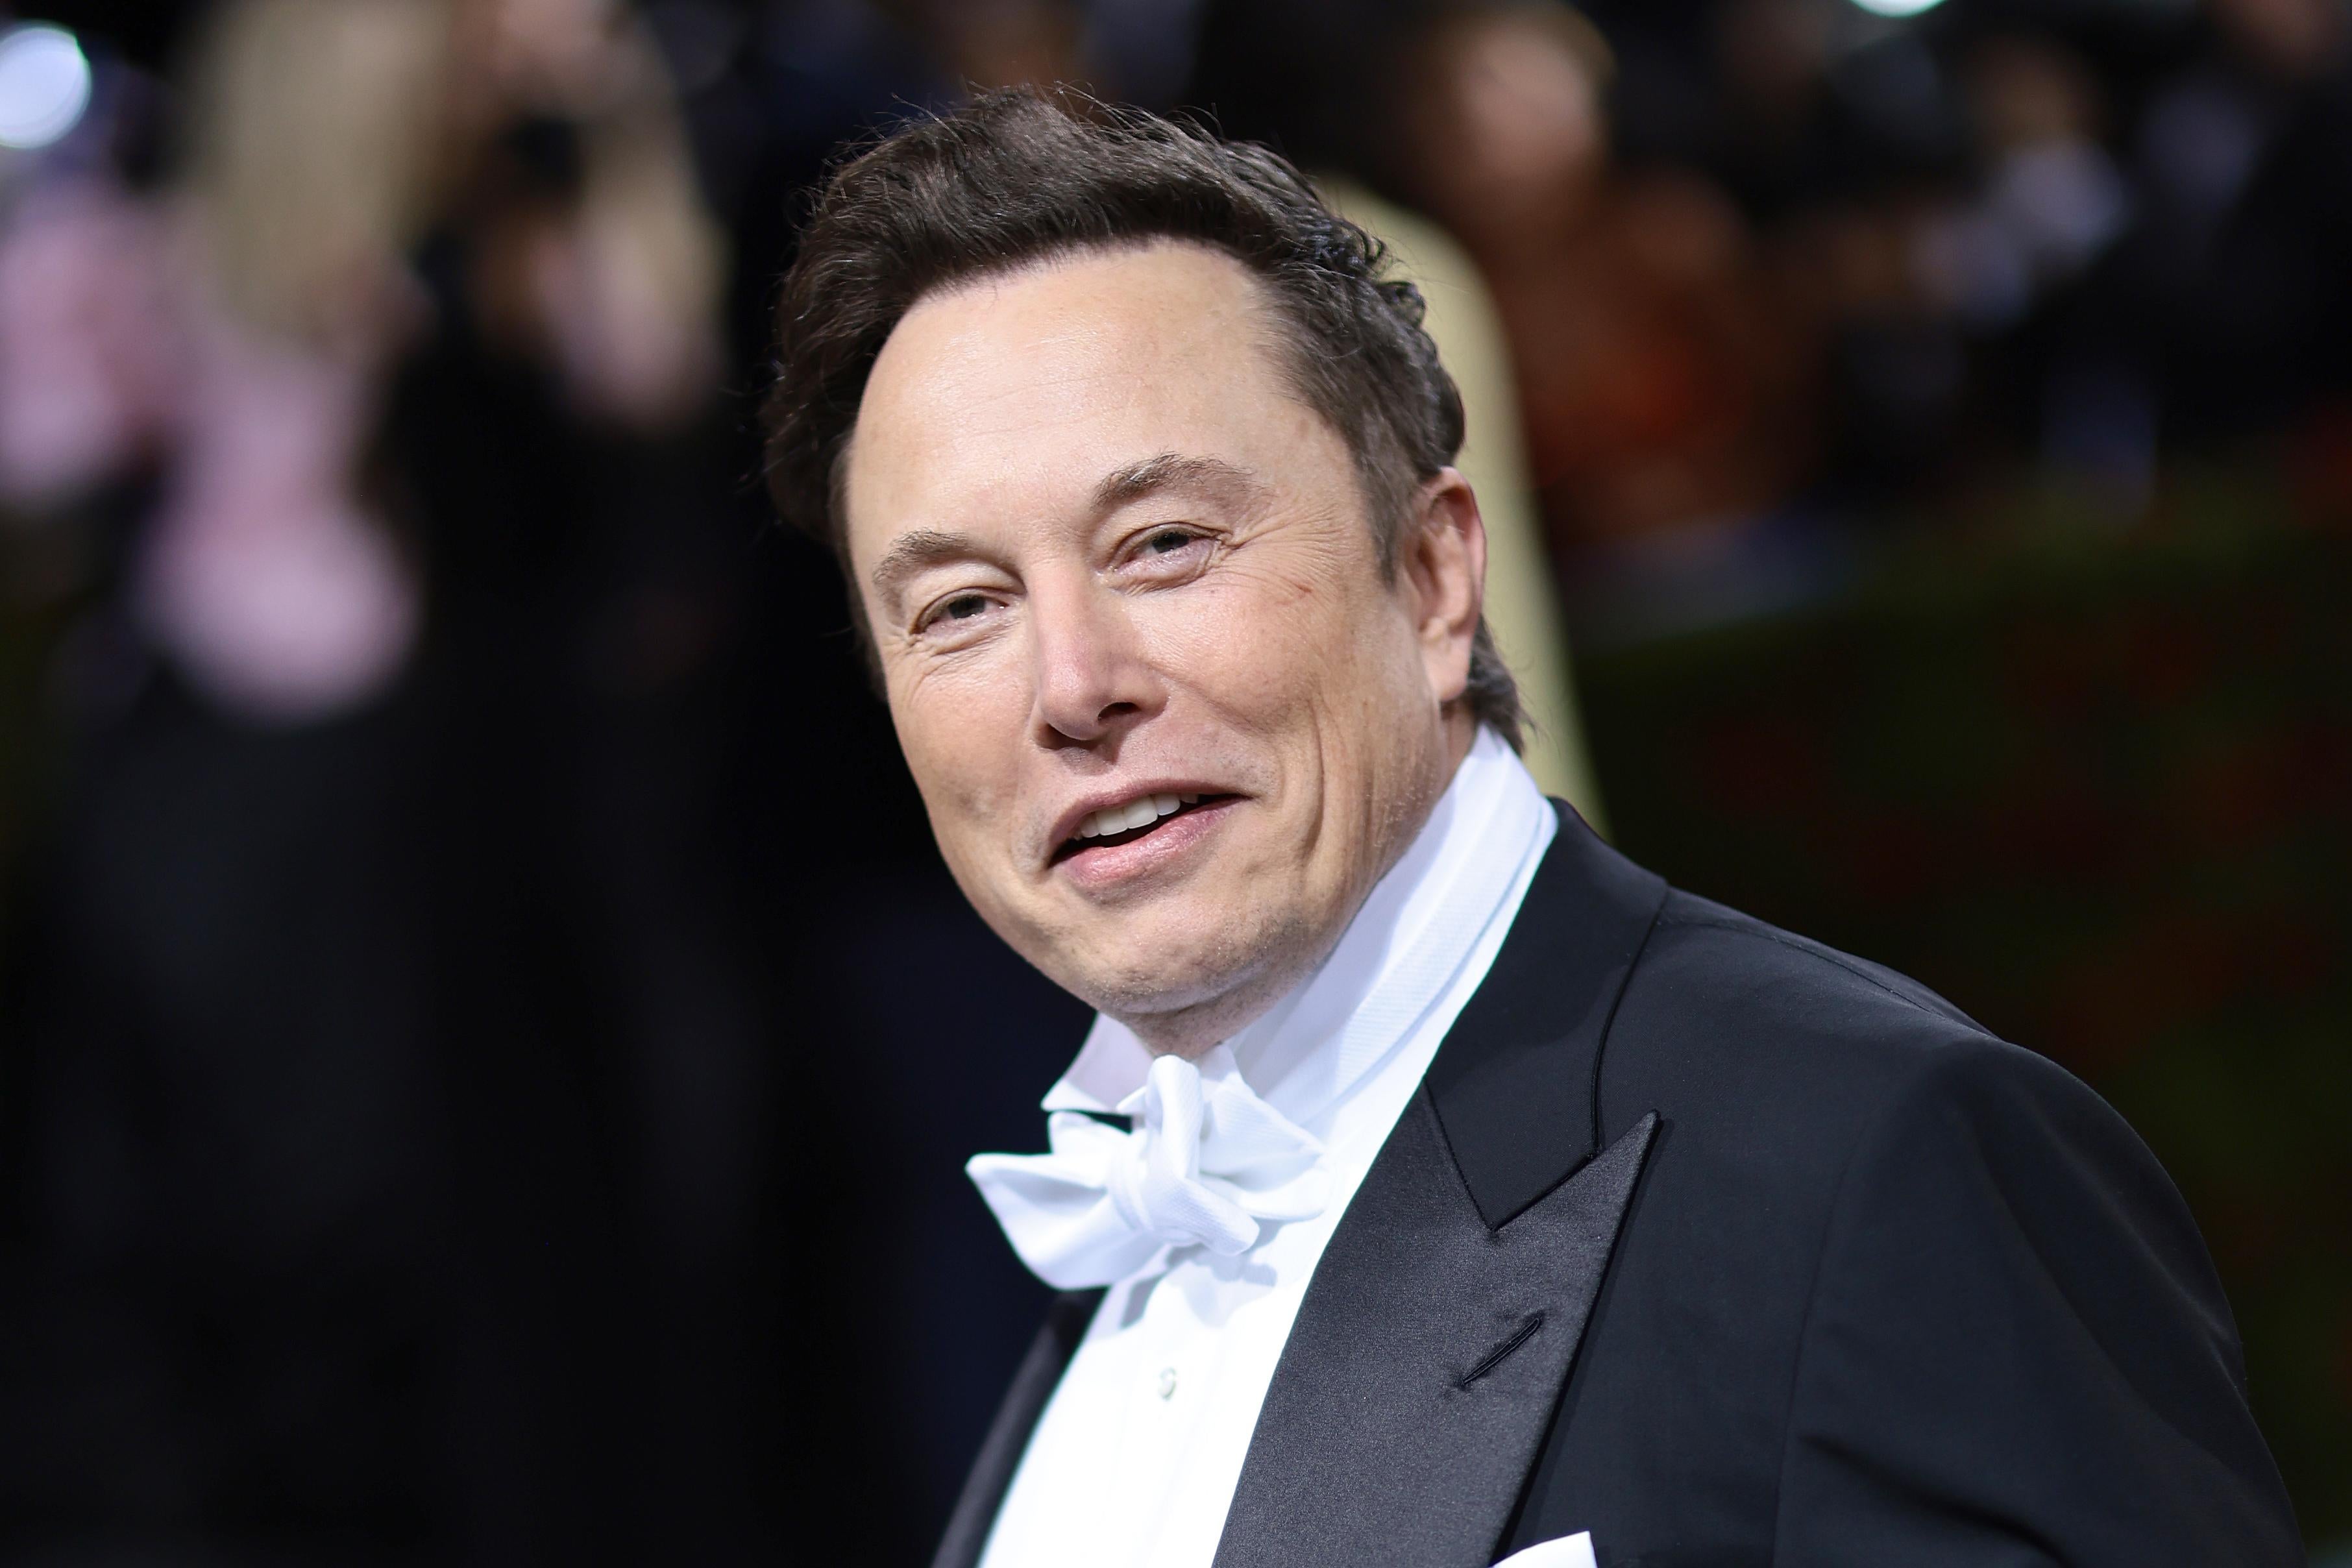 Elon Musk in a tux smiling at the Met Gala